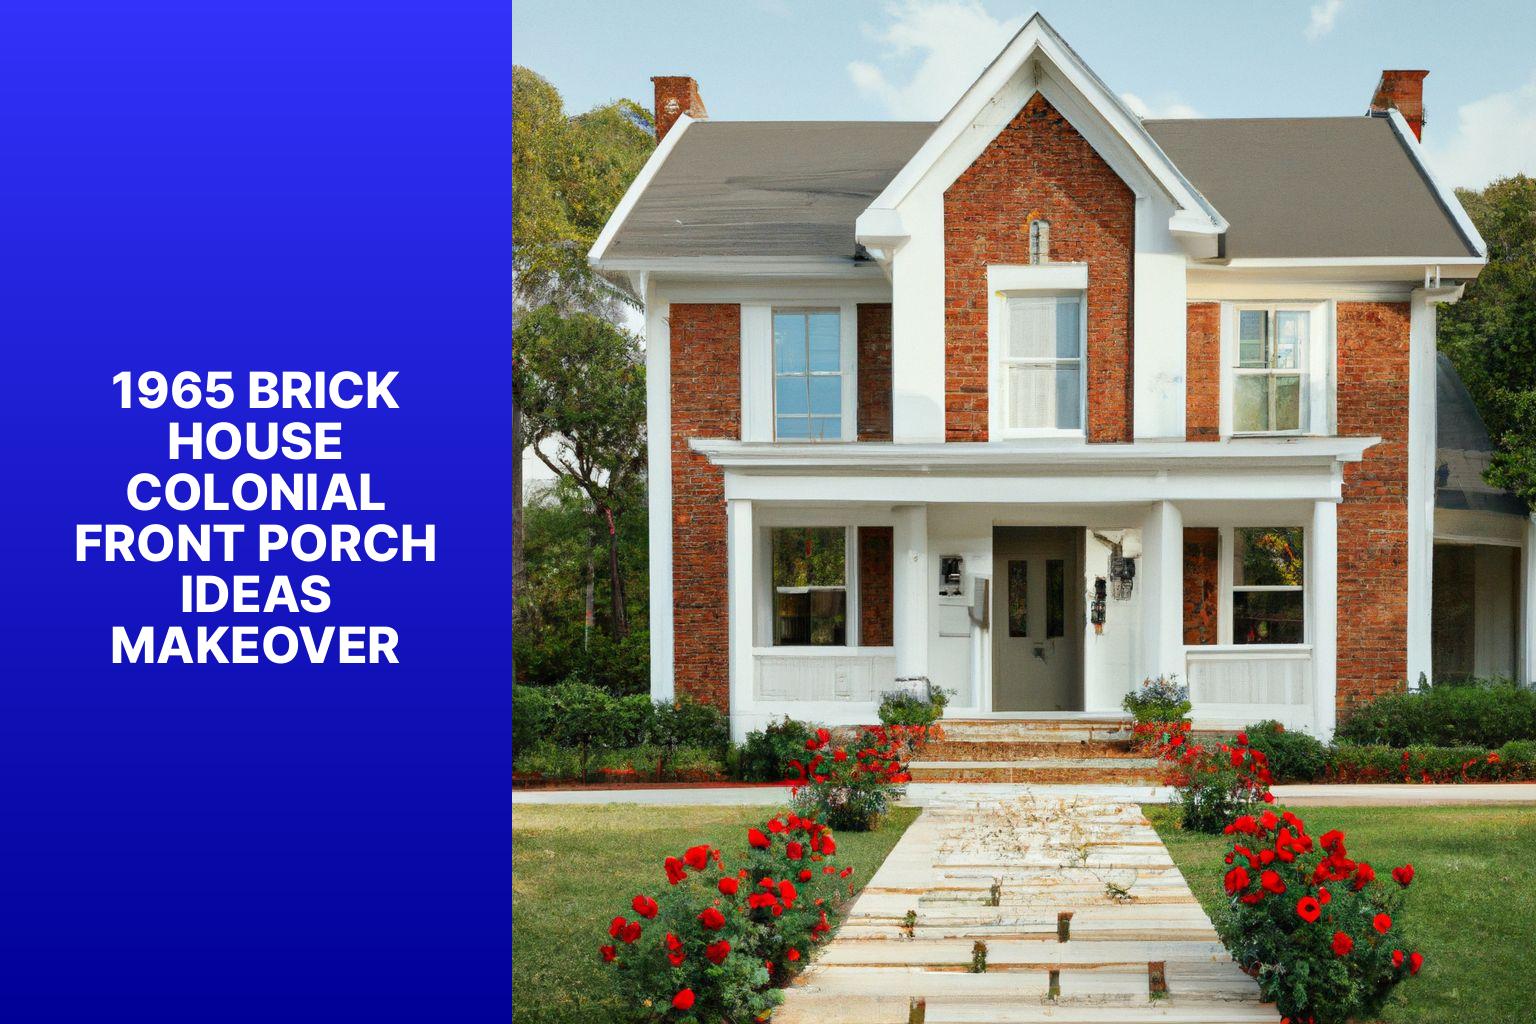 1965 brick house colonial front porch ideas makeover